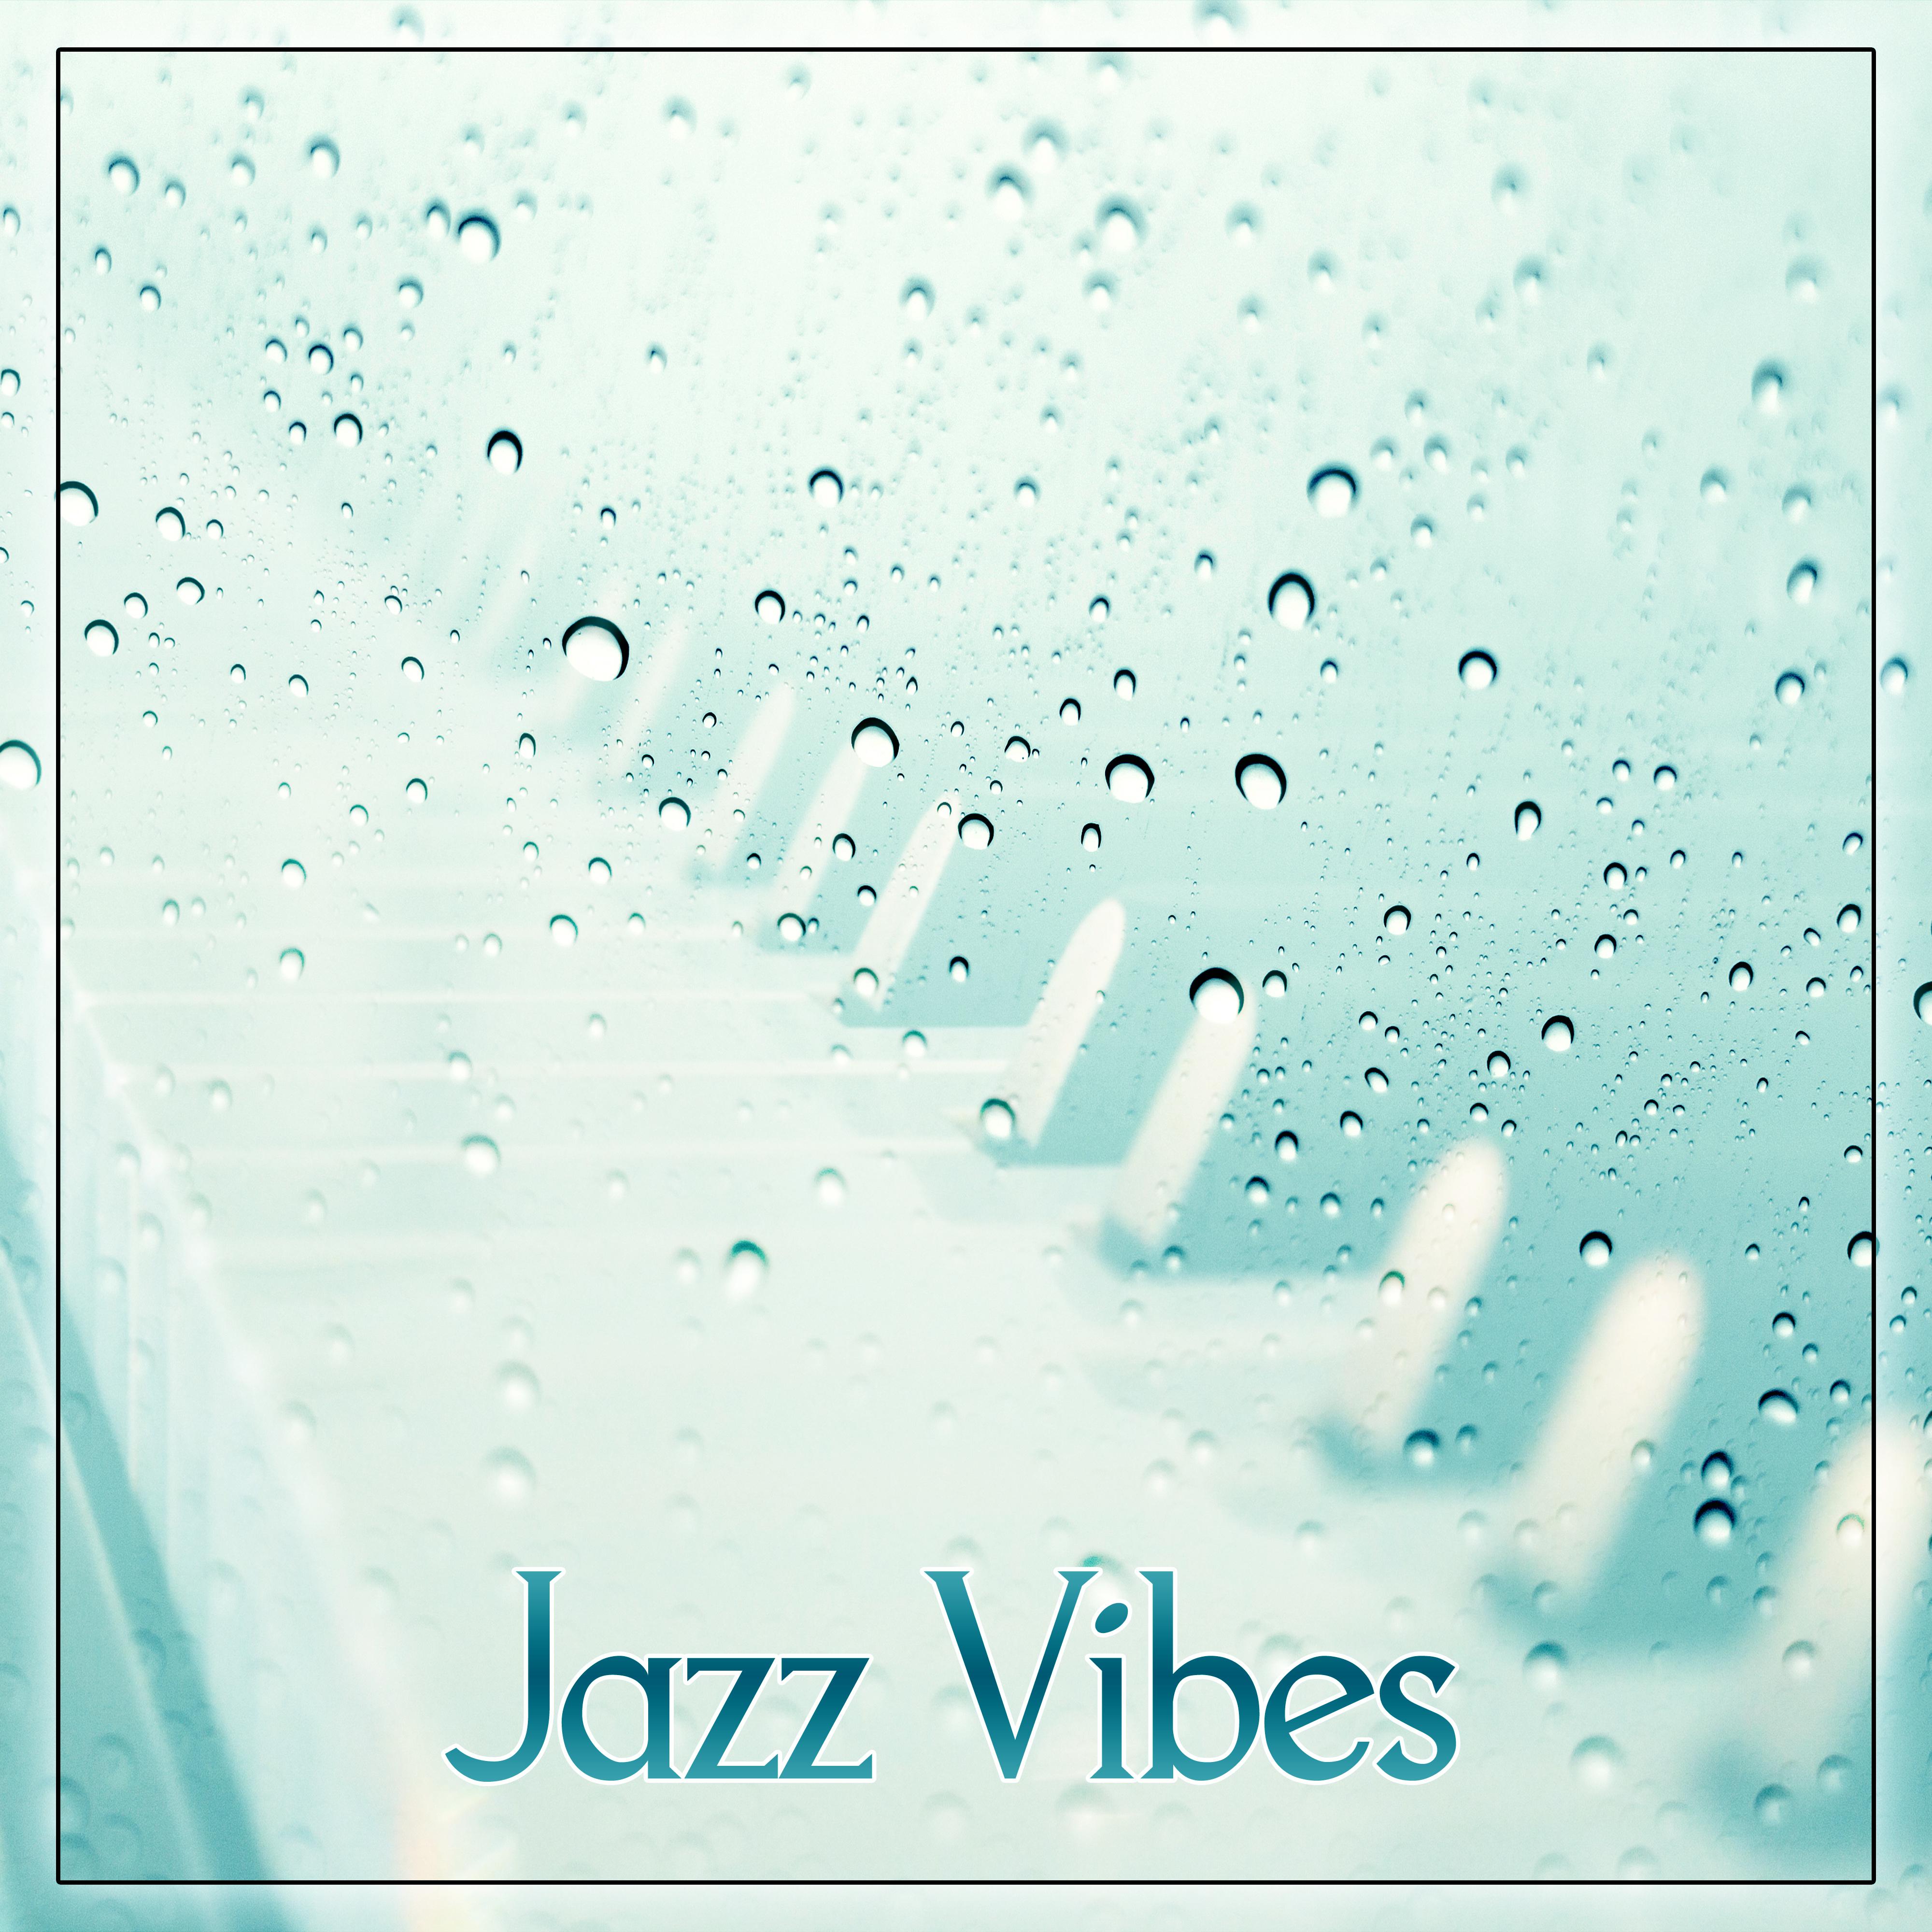 Jazz Vibes  Smooth Jazz for Relax Session, Free Friday, Soothing Vibes of Jazz Piano Sounds, Background Music to Relax